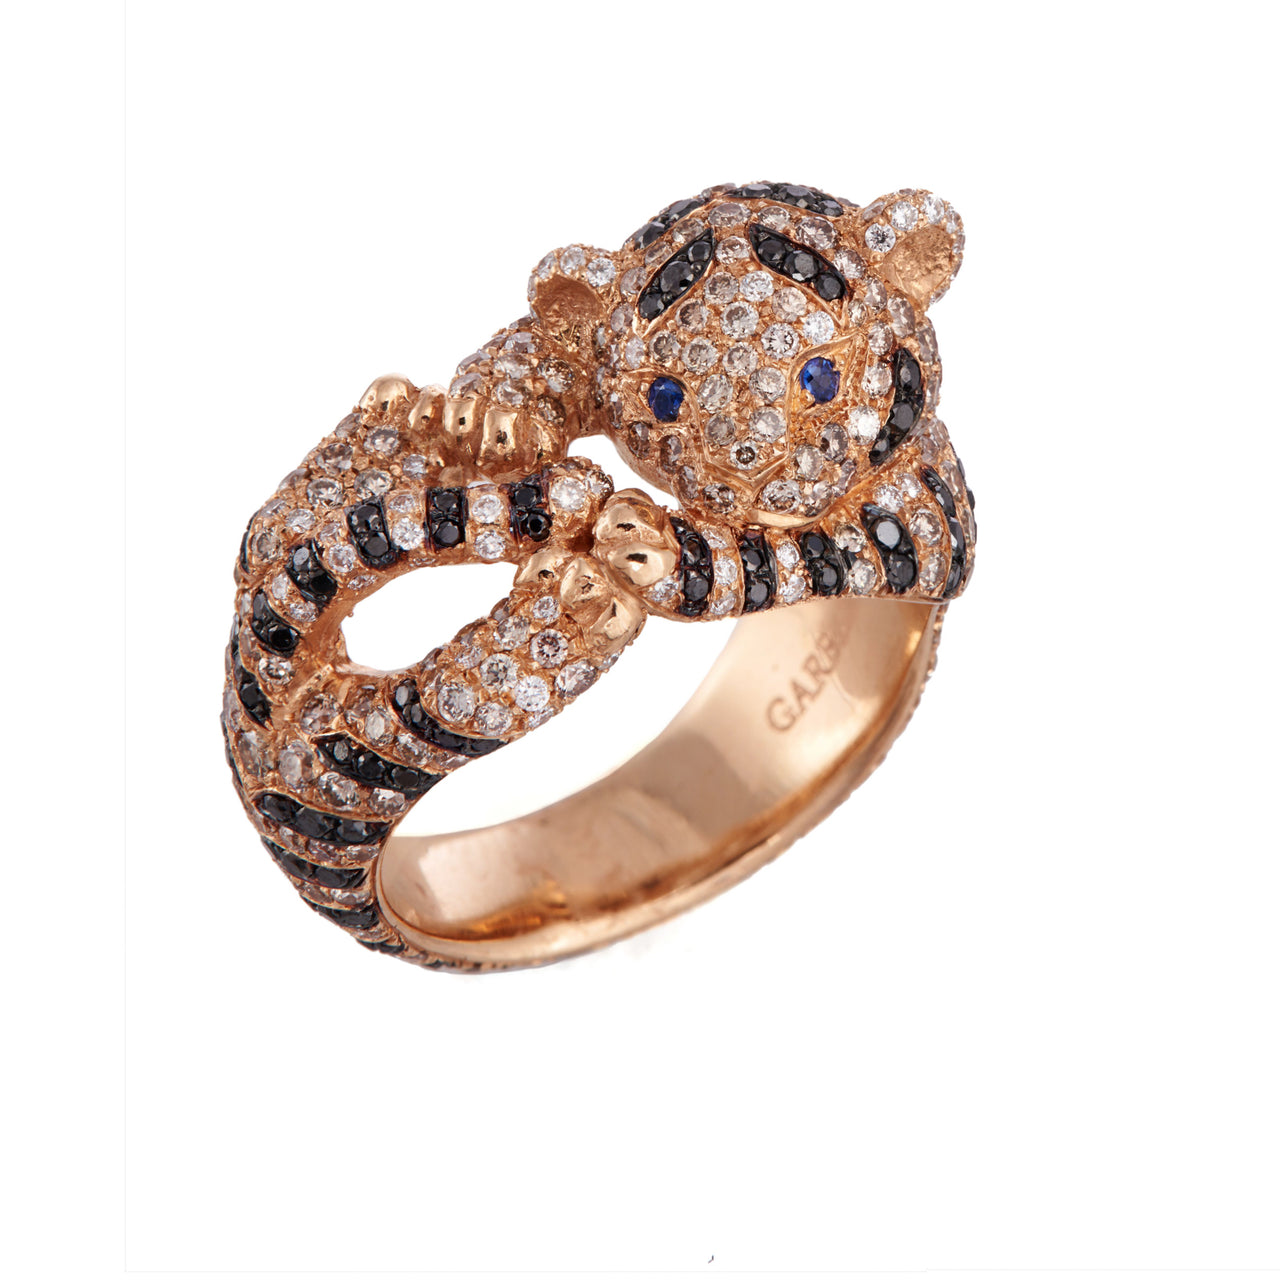 Kitty Kat Ring with Diamonds & Sapphires